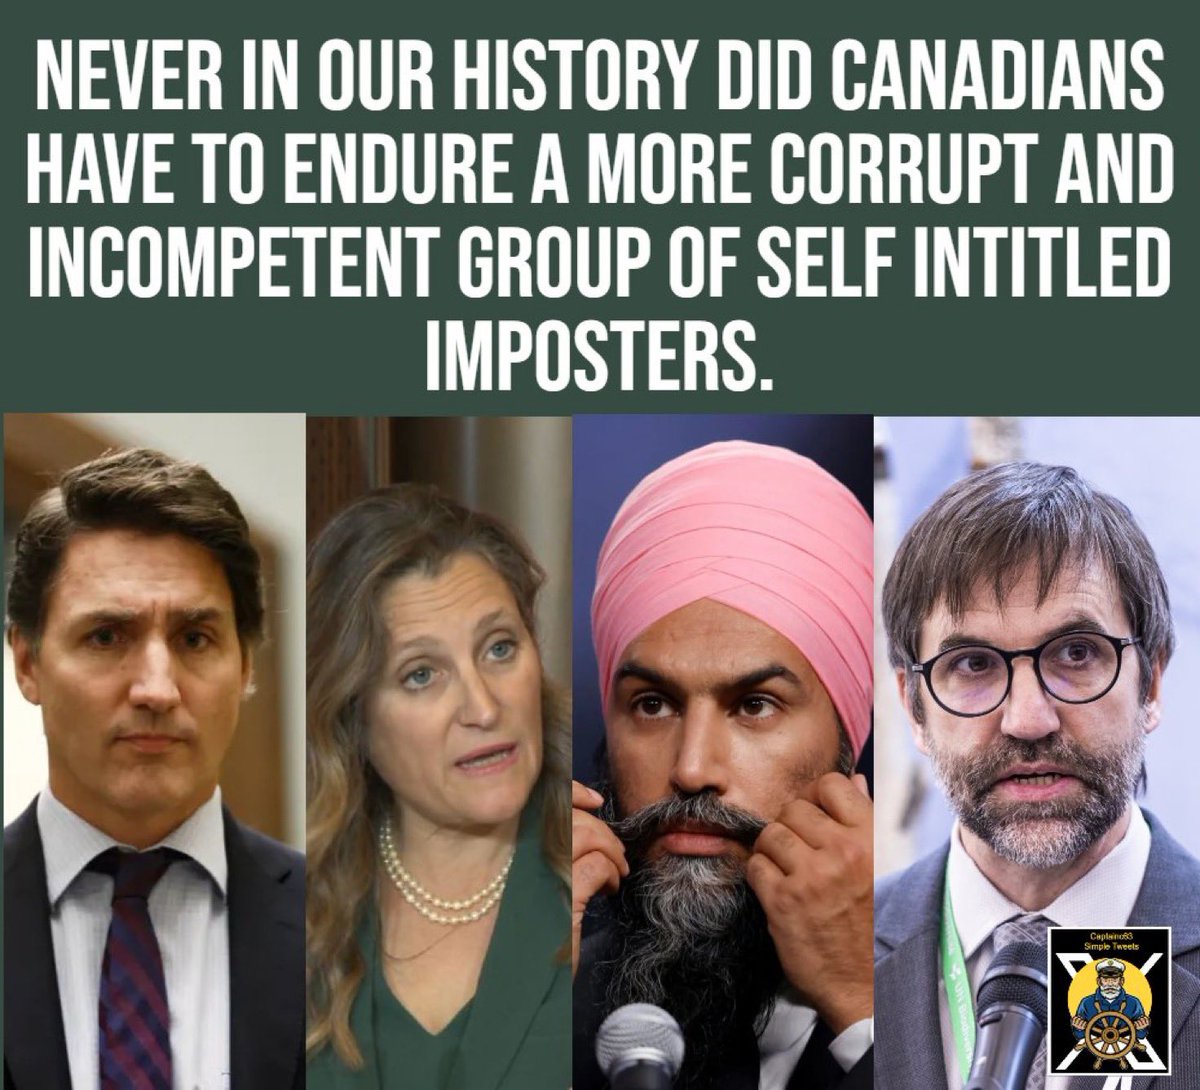 Good morning Canadian Patriots! Happy Wednesday. We better vote like our lives depend on it. #LiberalsMustGo #SinghMustGo #NeverNDP #LiberalsAreCorrupt